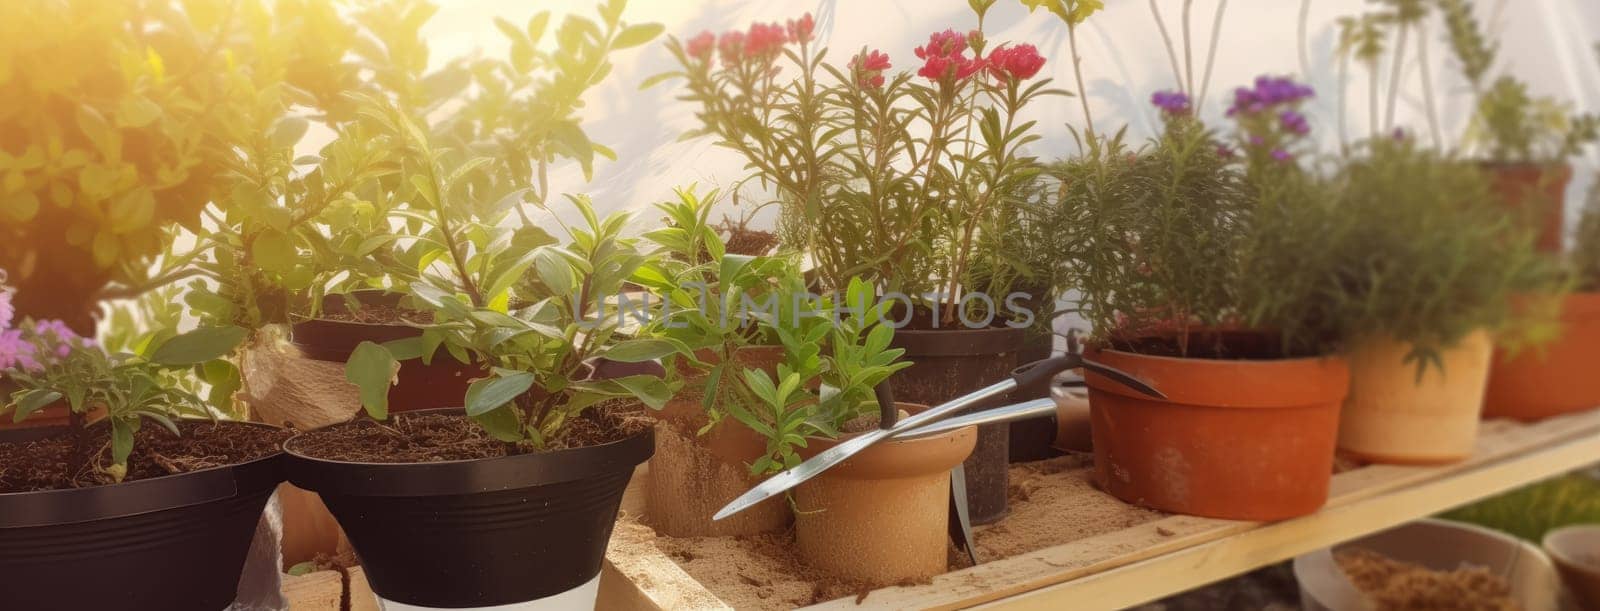 Soil in the flower pots and gardening tools on wooden flat lay background with copy space.,,